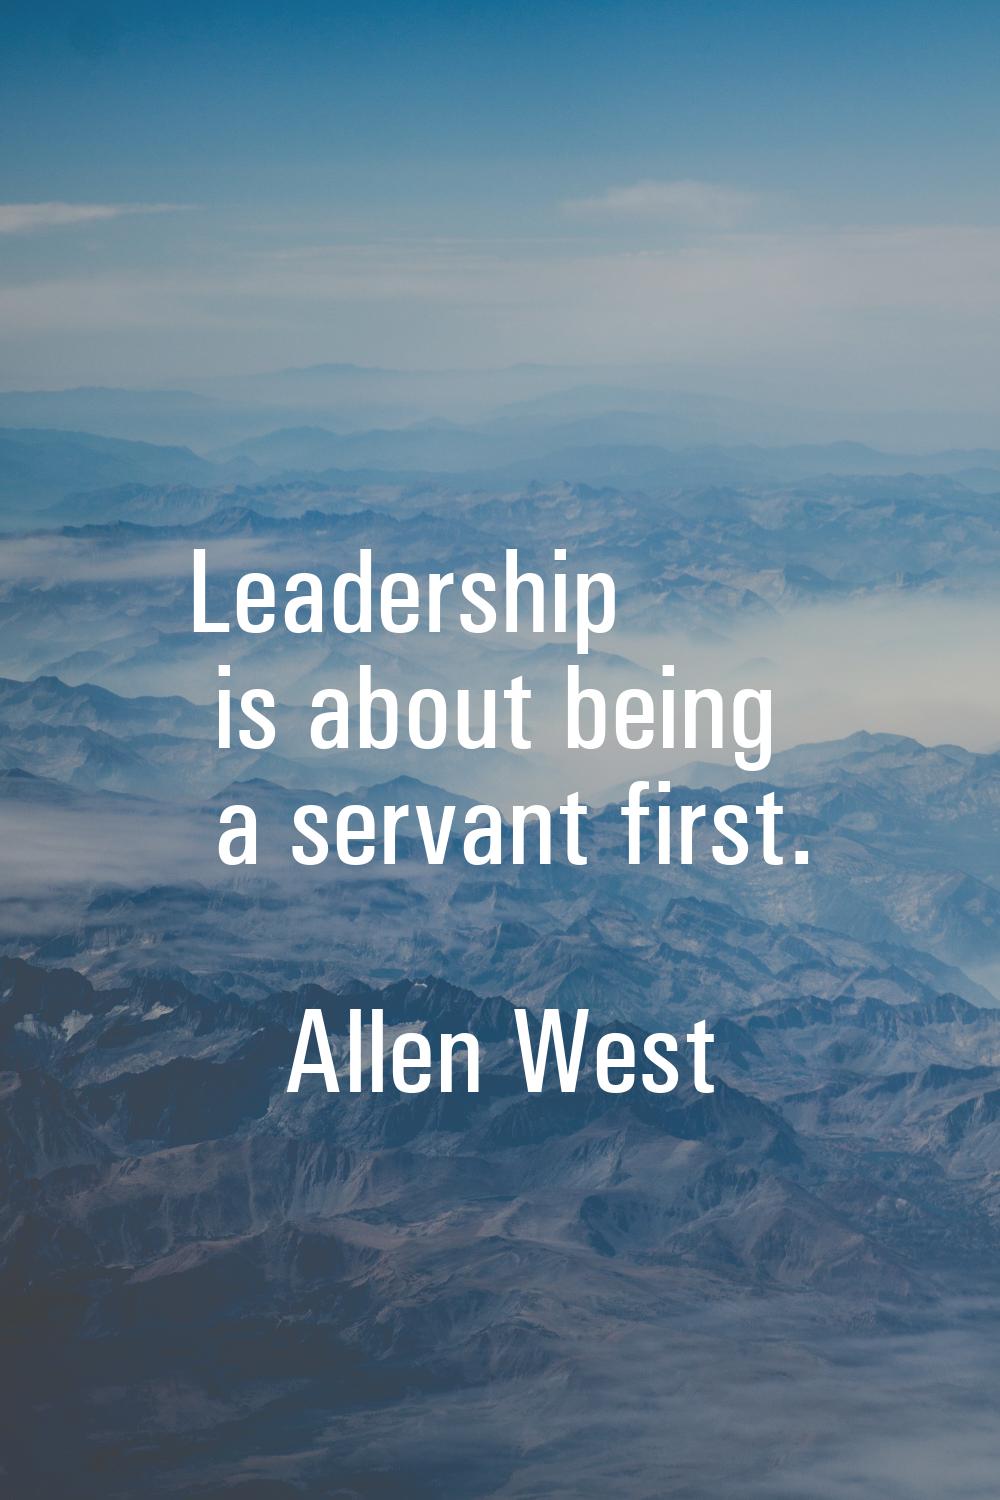 Leadership is about being a servant first.